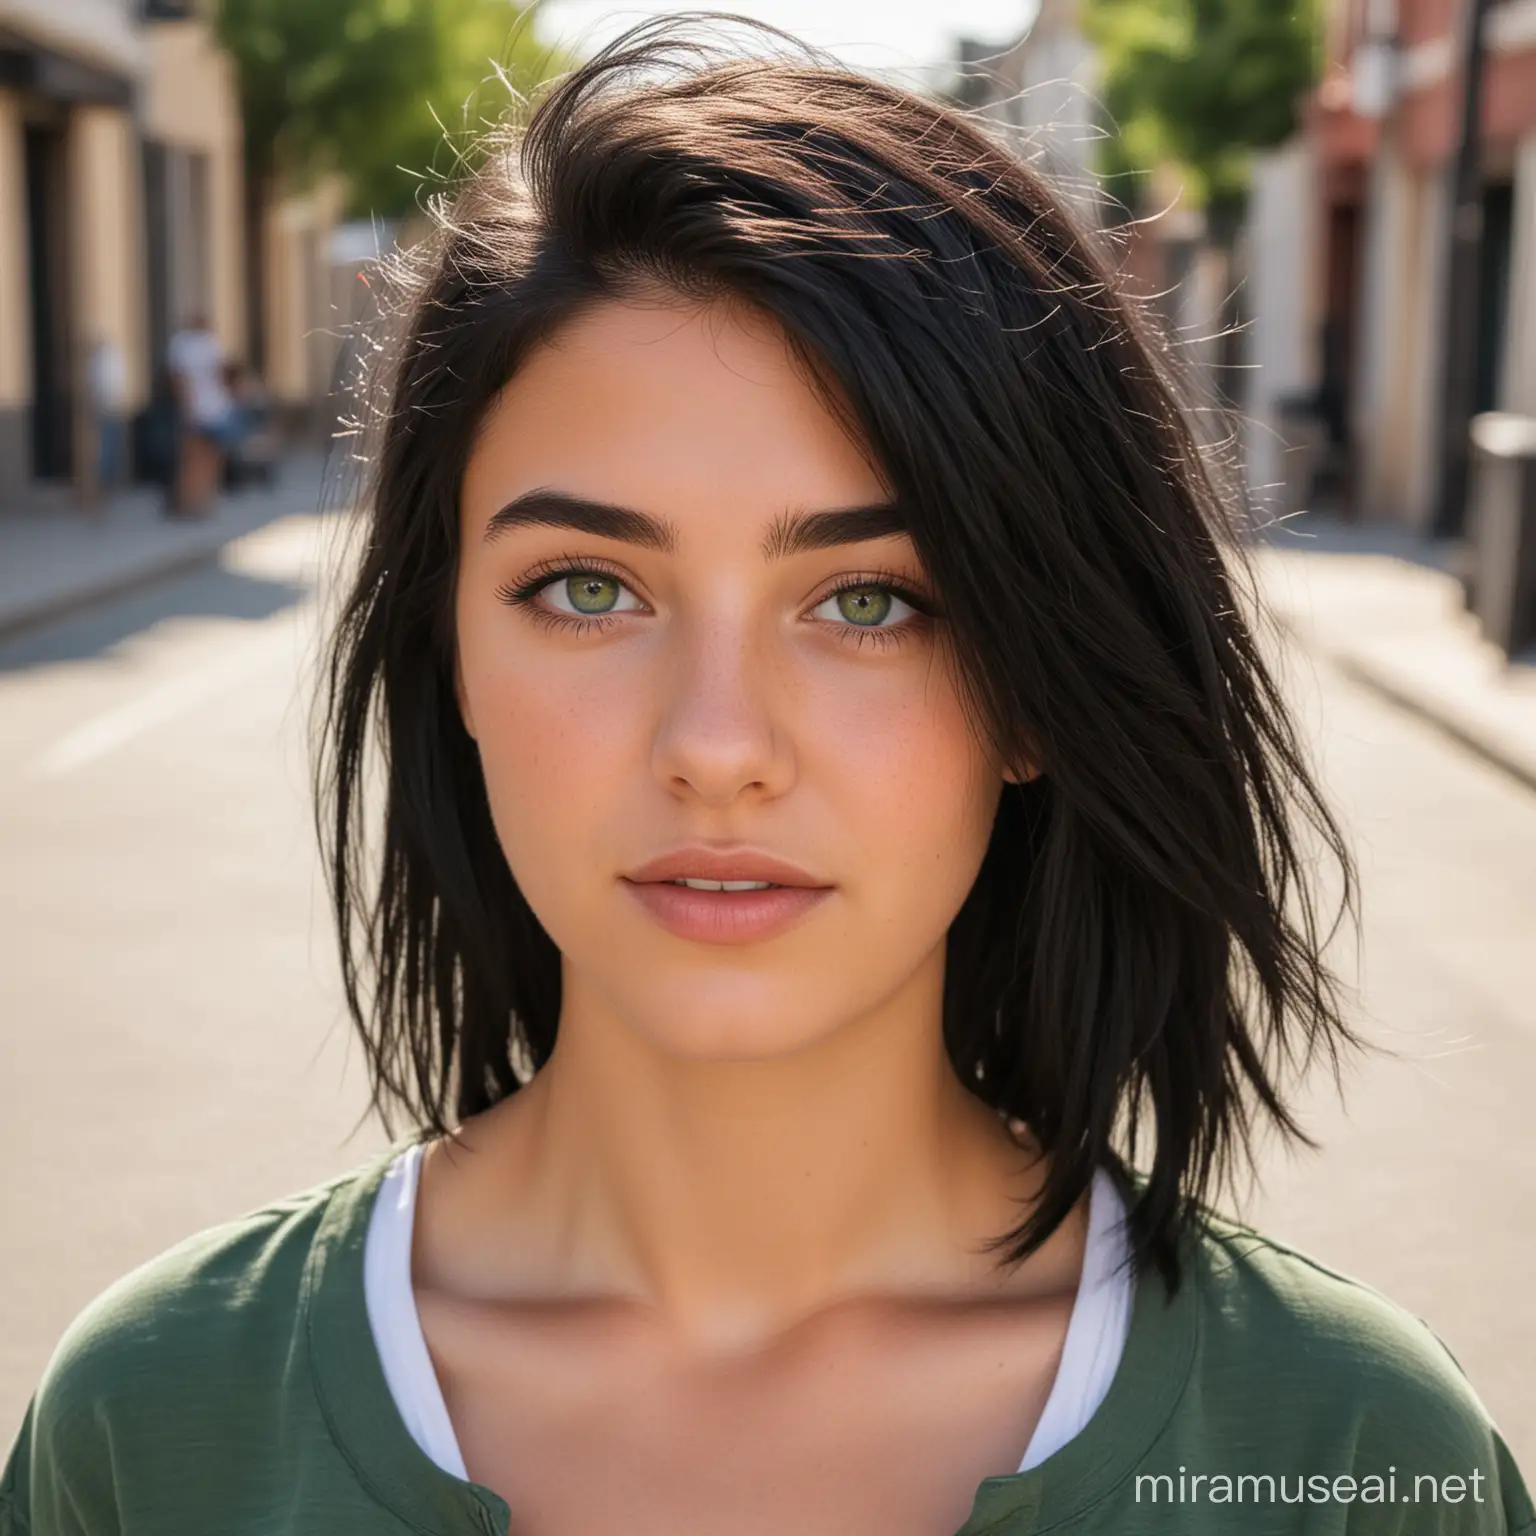 a 20-year-old white woman with a cute face, with green eyes and black hair, on the street in summer clothes
